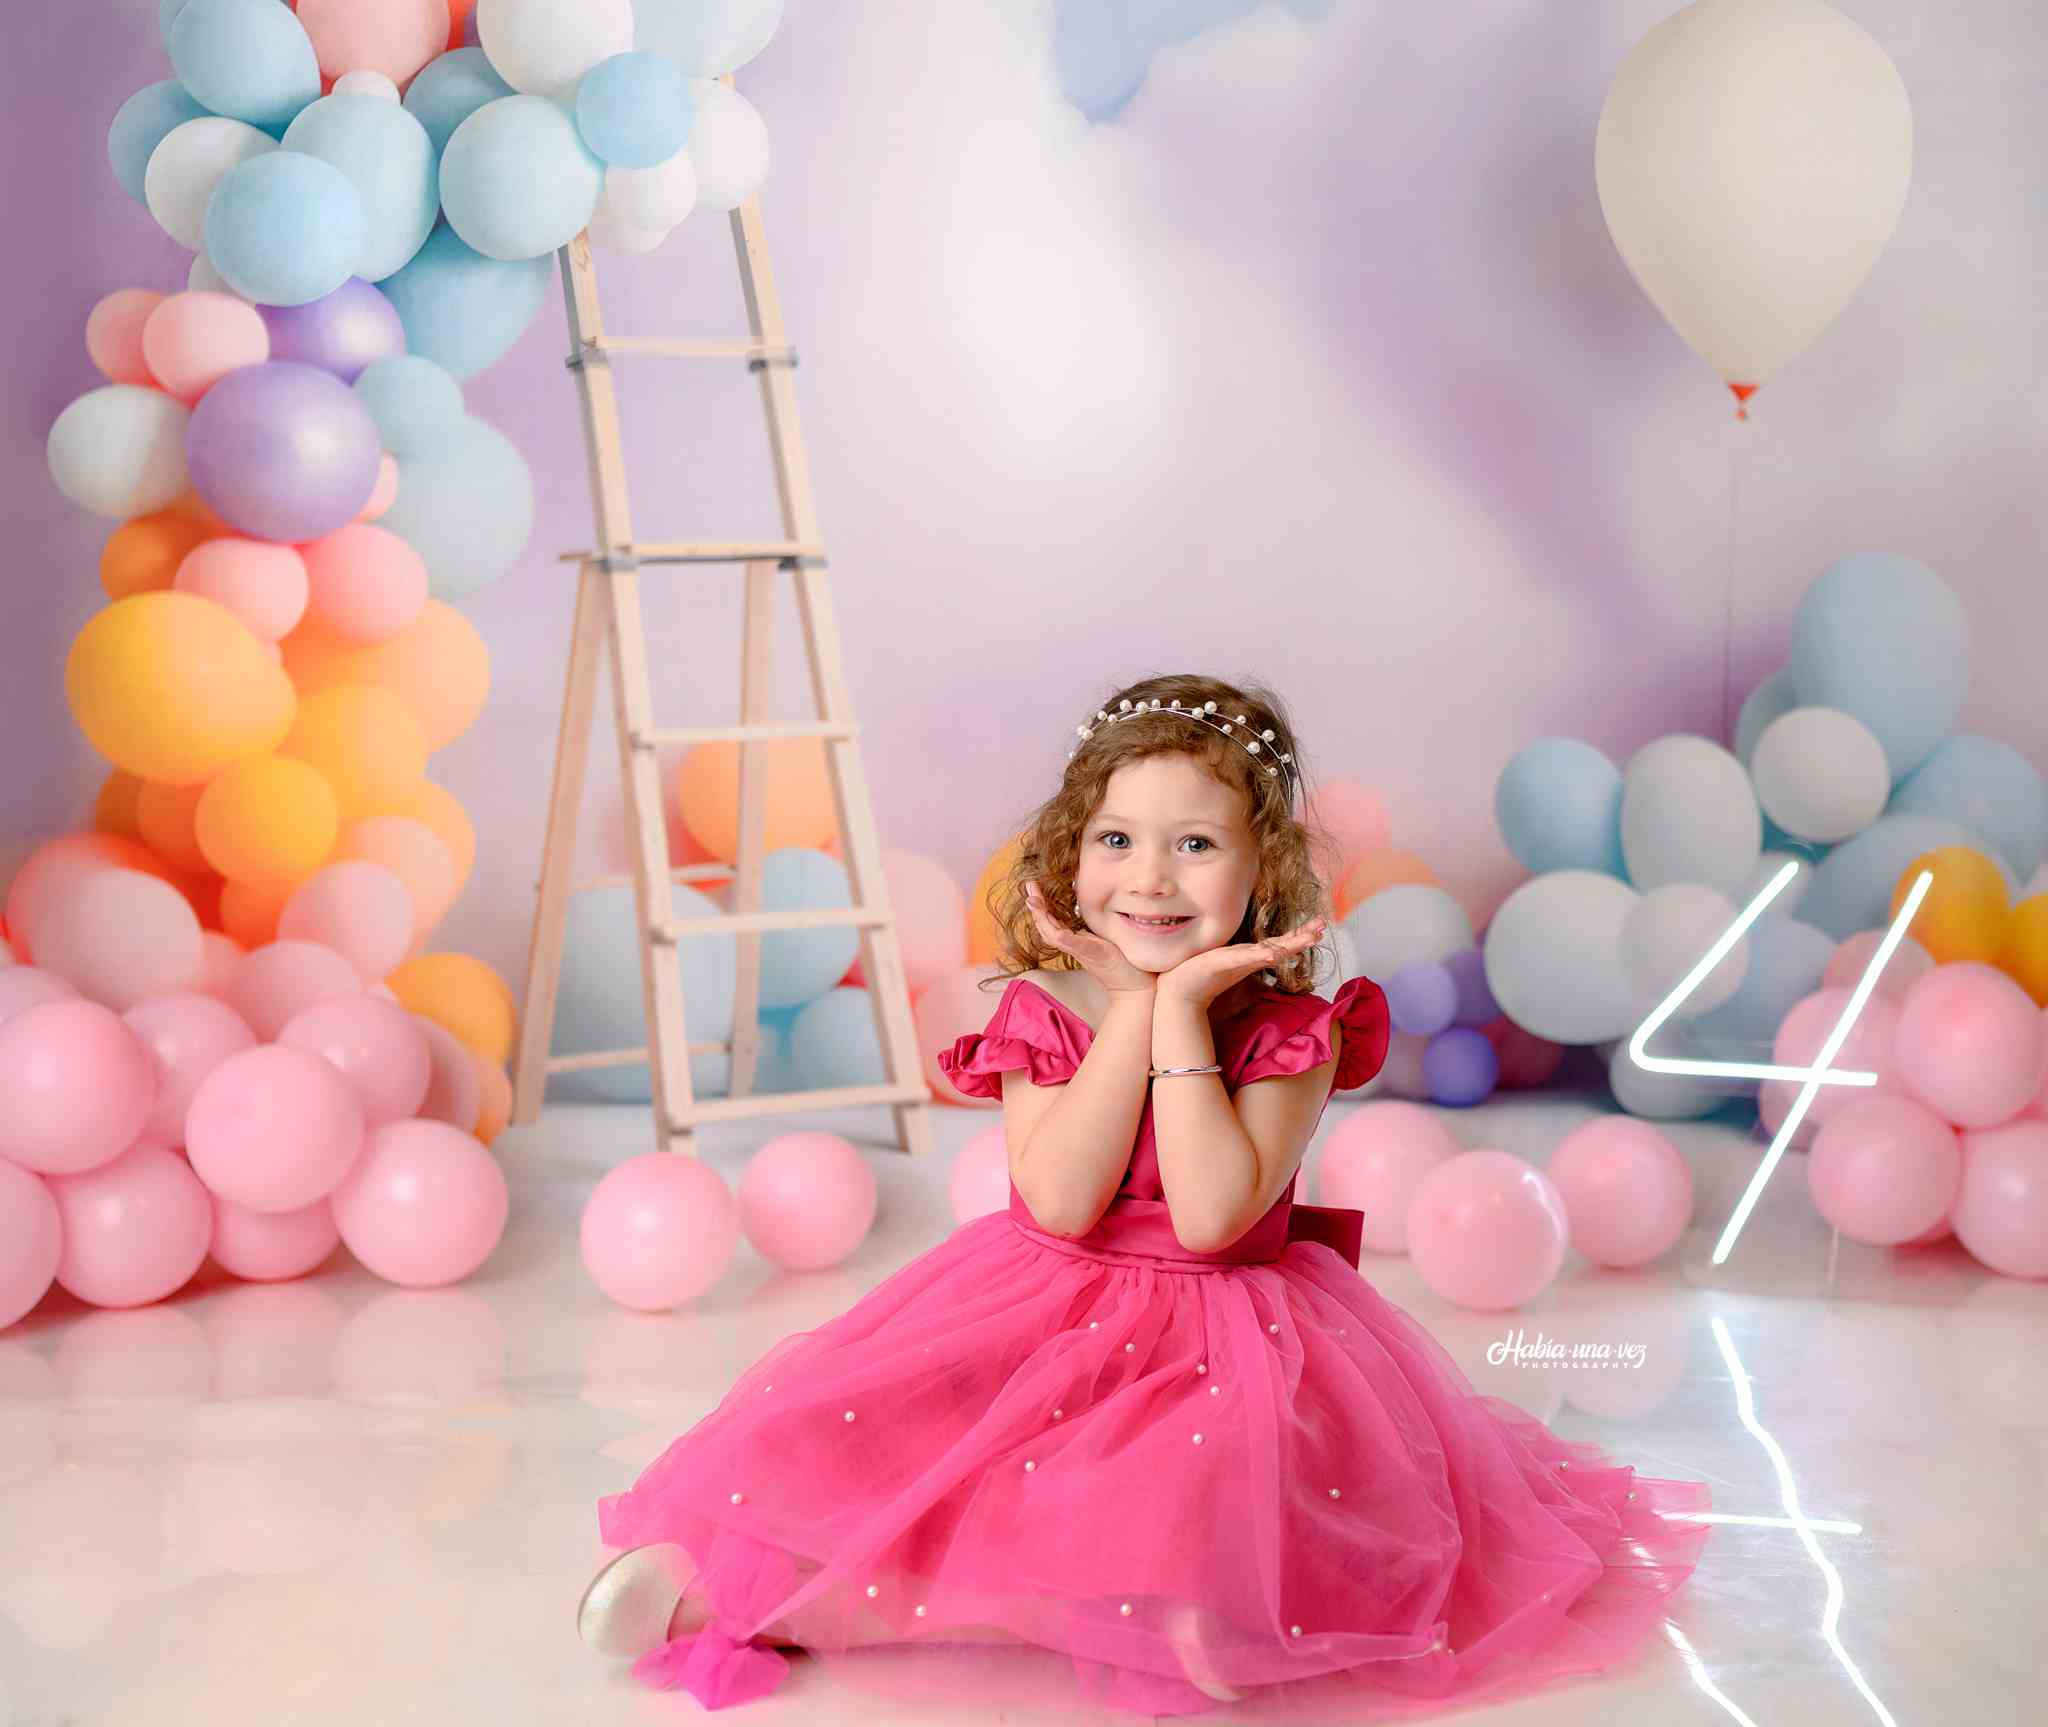 Kate Balloon Cloud Birthday Backdrop Designed by Chain Photography